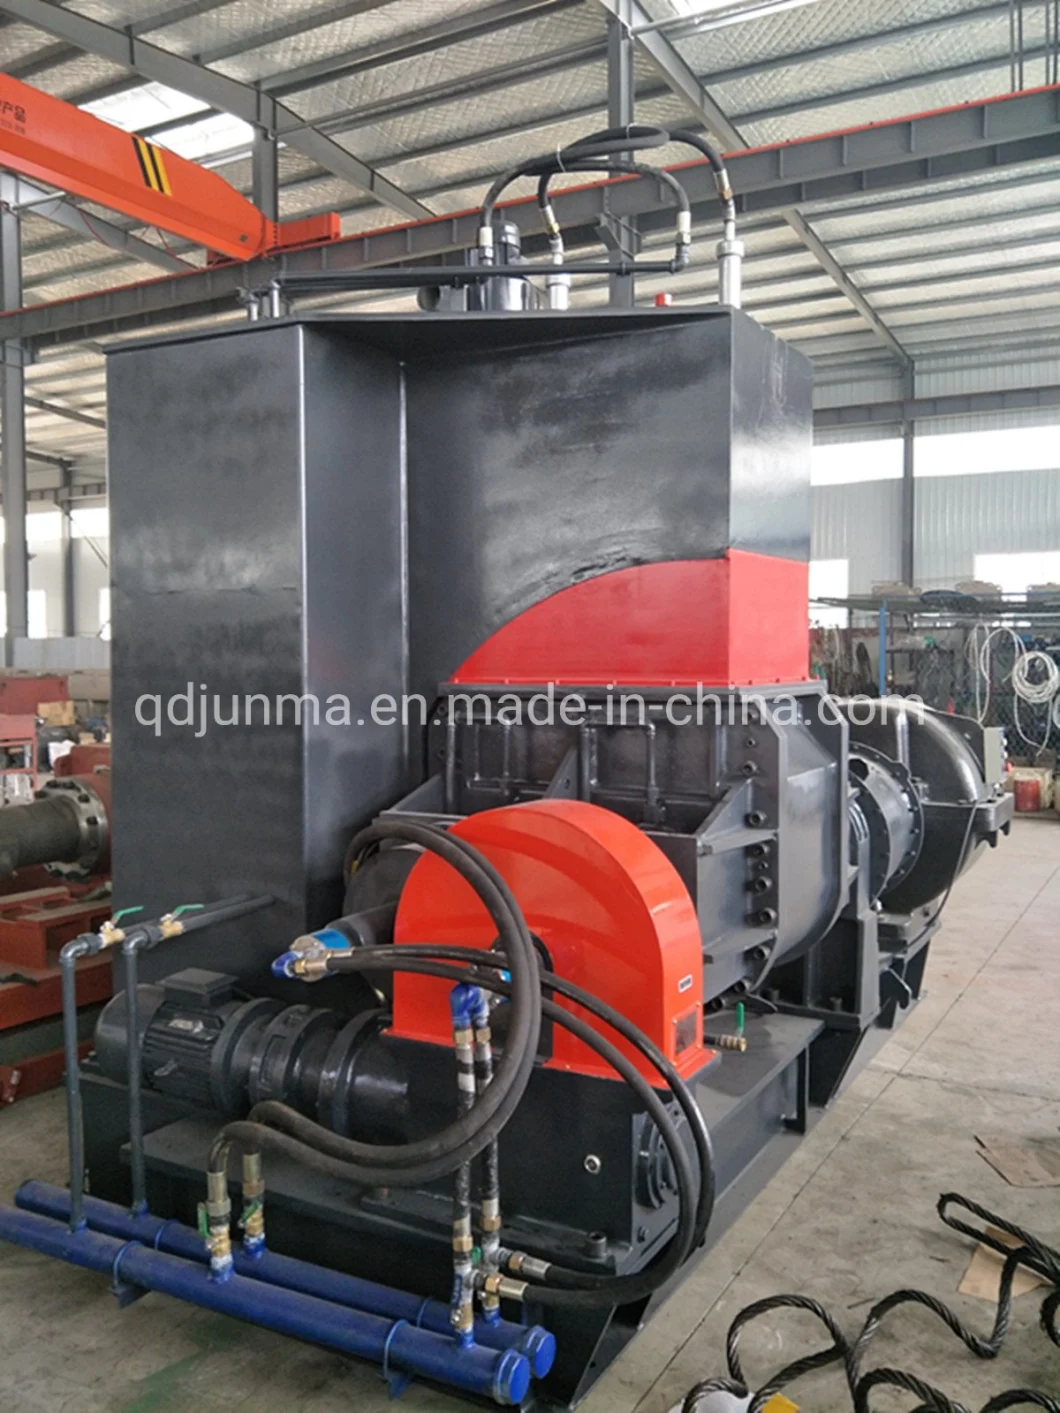 Dispersion Mixer, Rubber Kneader for Mixing Rubber X (S) N-55L, Natural Rubber Machine